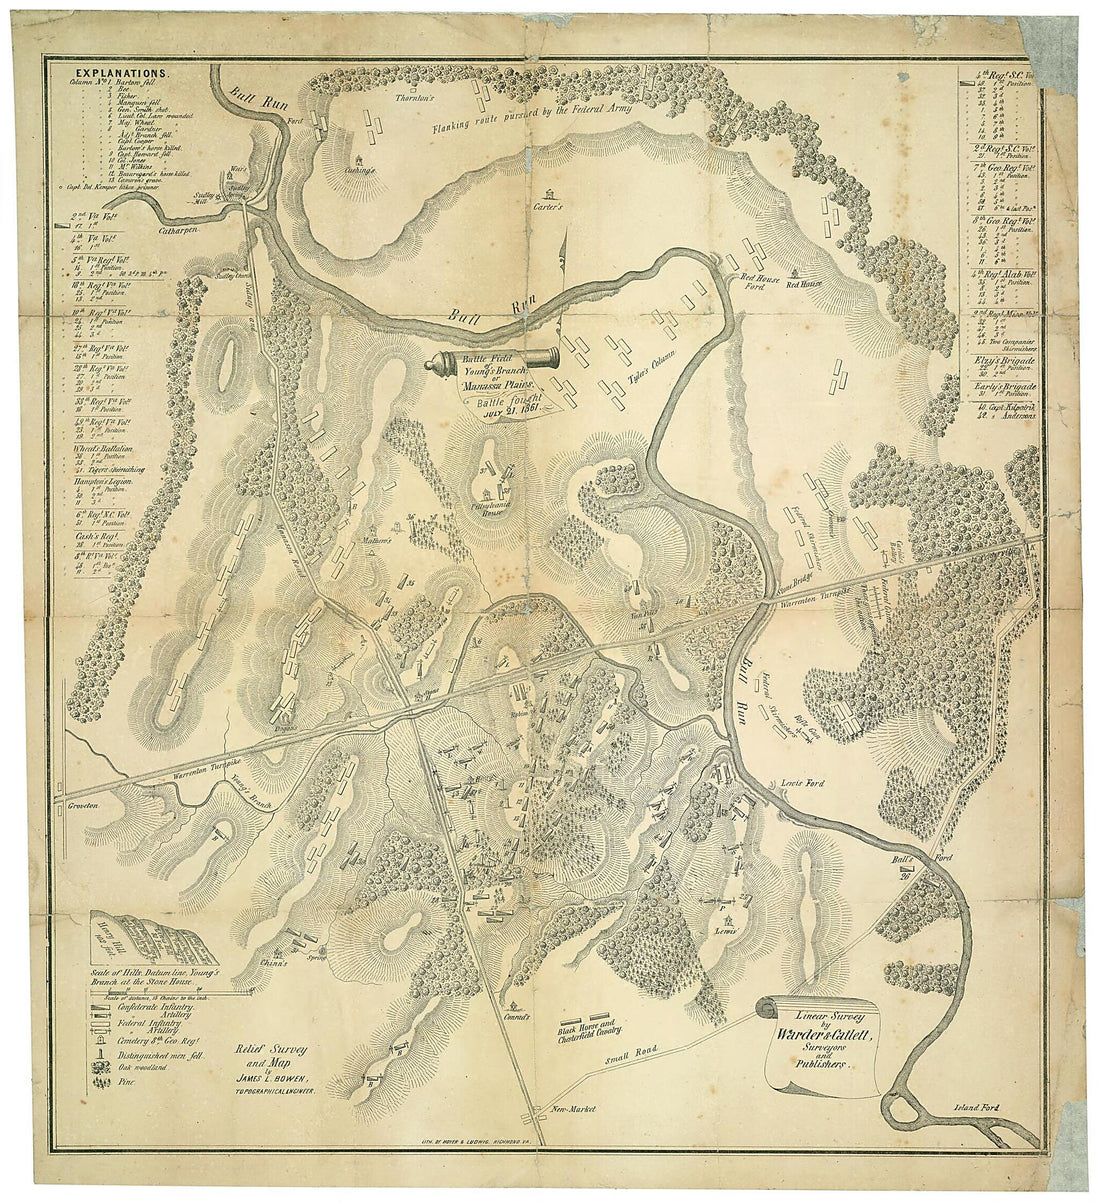 This old map of Battle Field of Young&